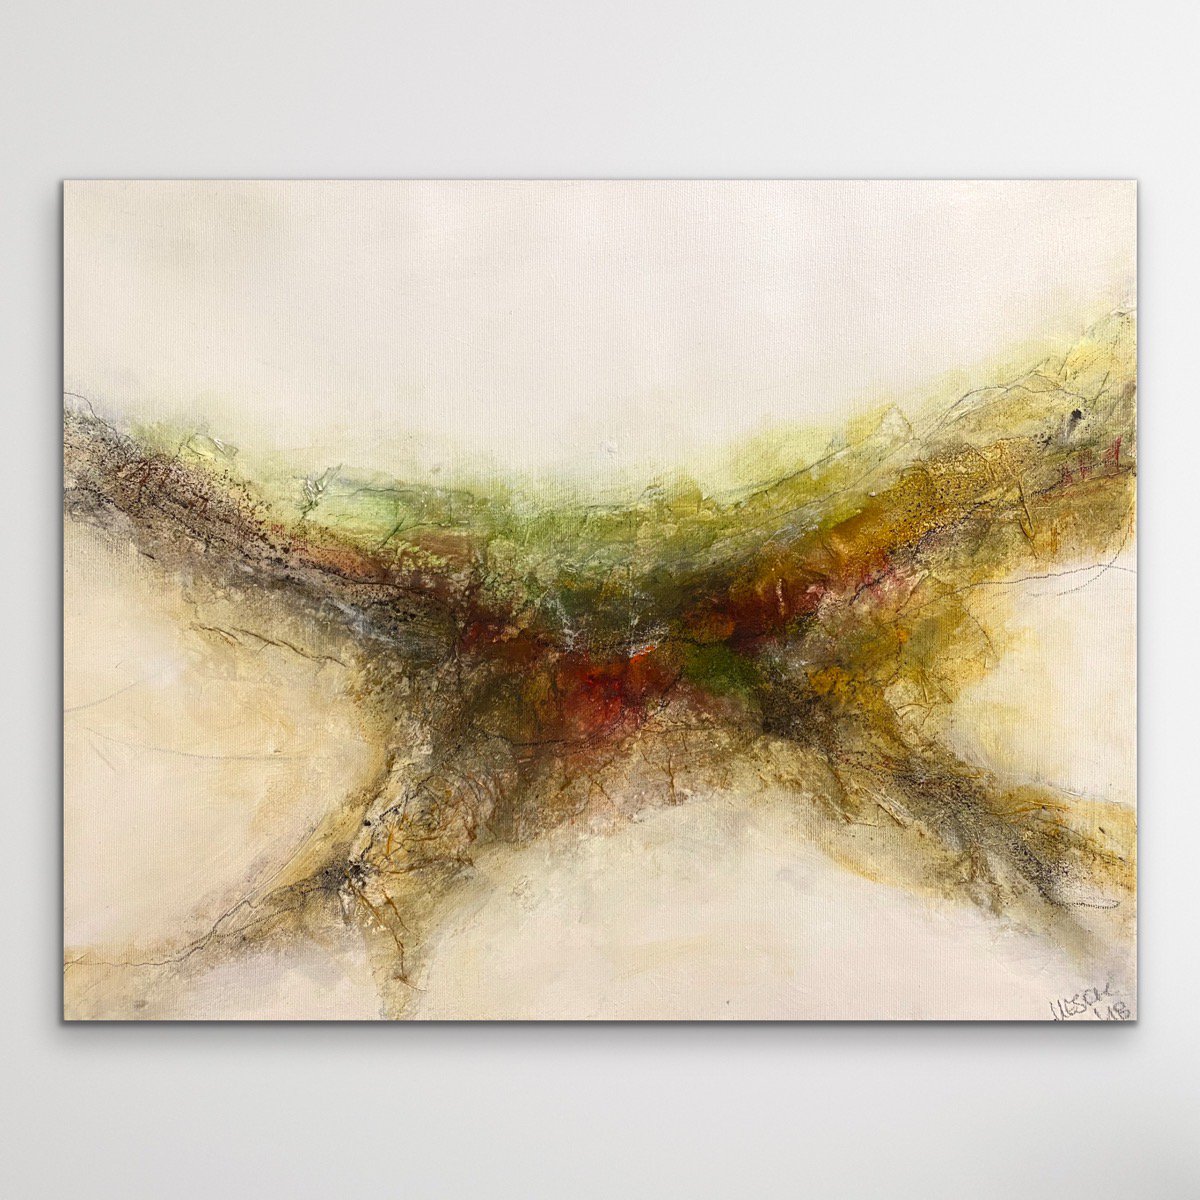 Landscape I 50 x 40 cm I abstract natural landscape I structured painting by Kirsten Schankweiler